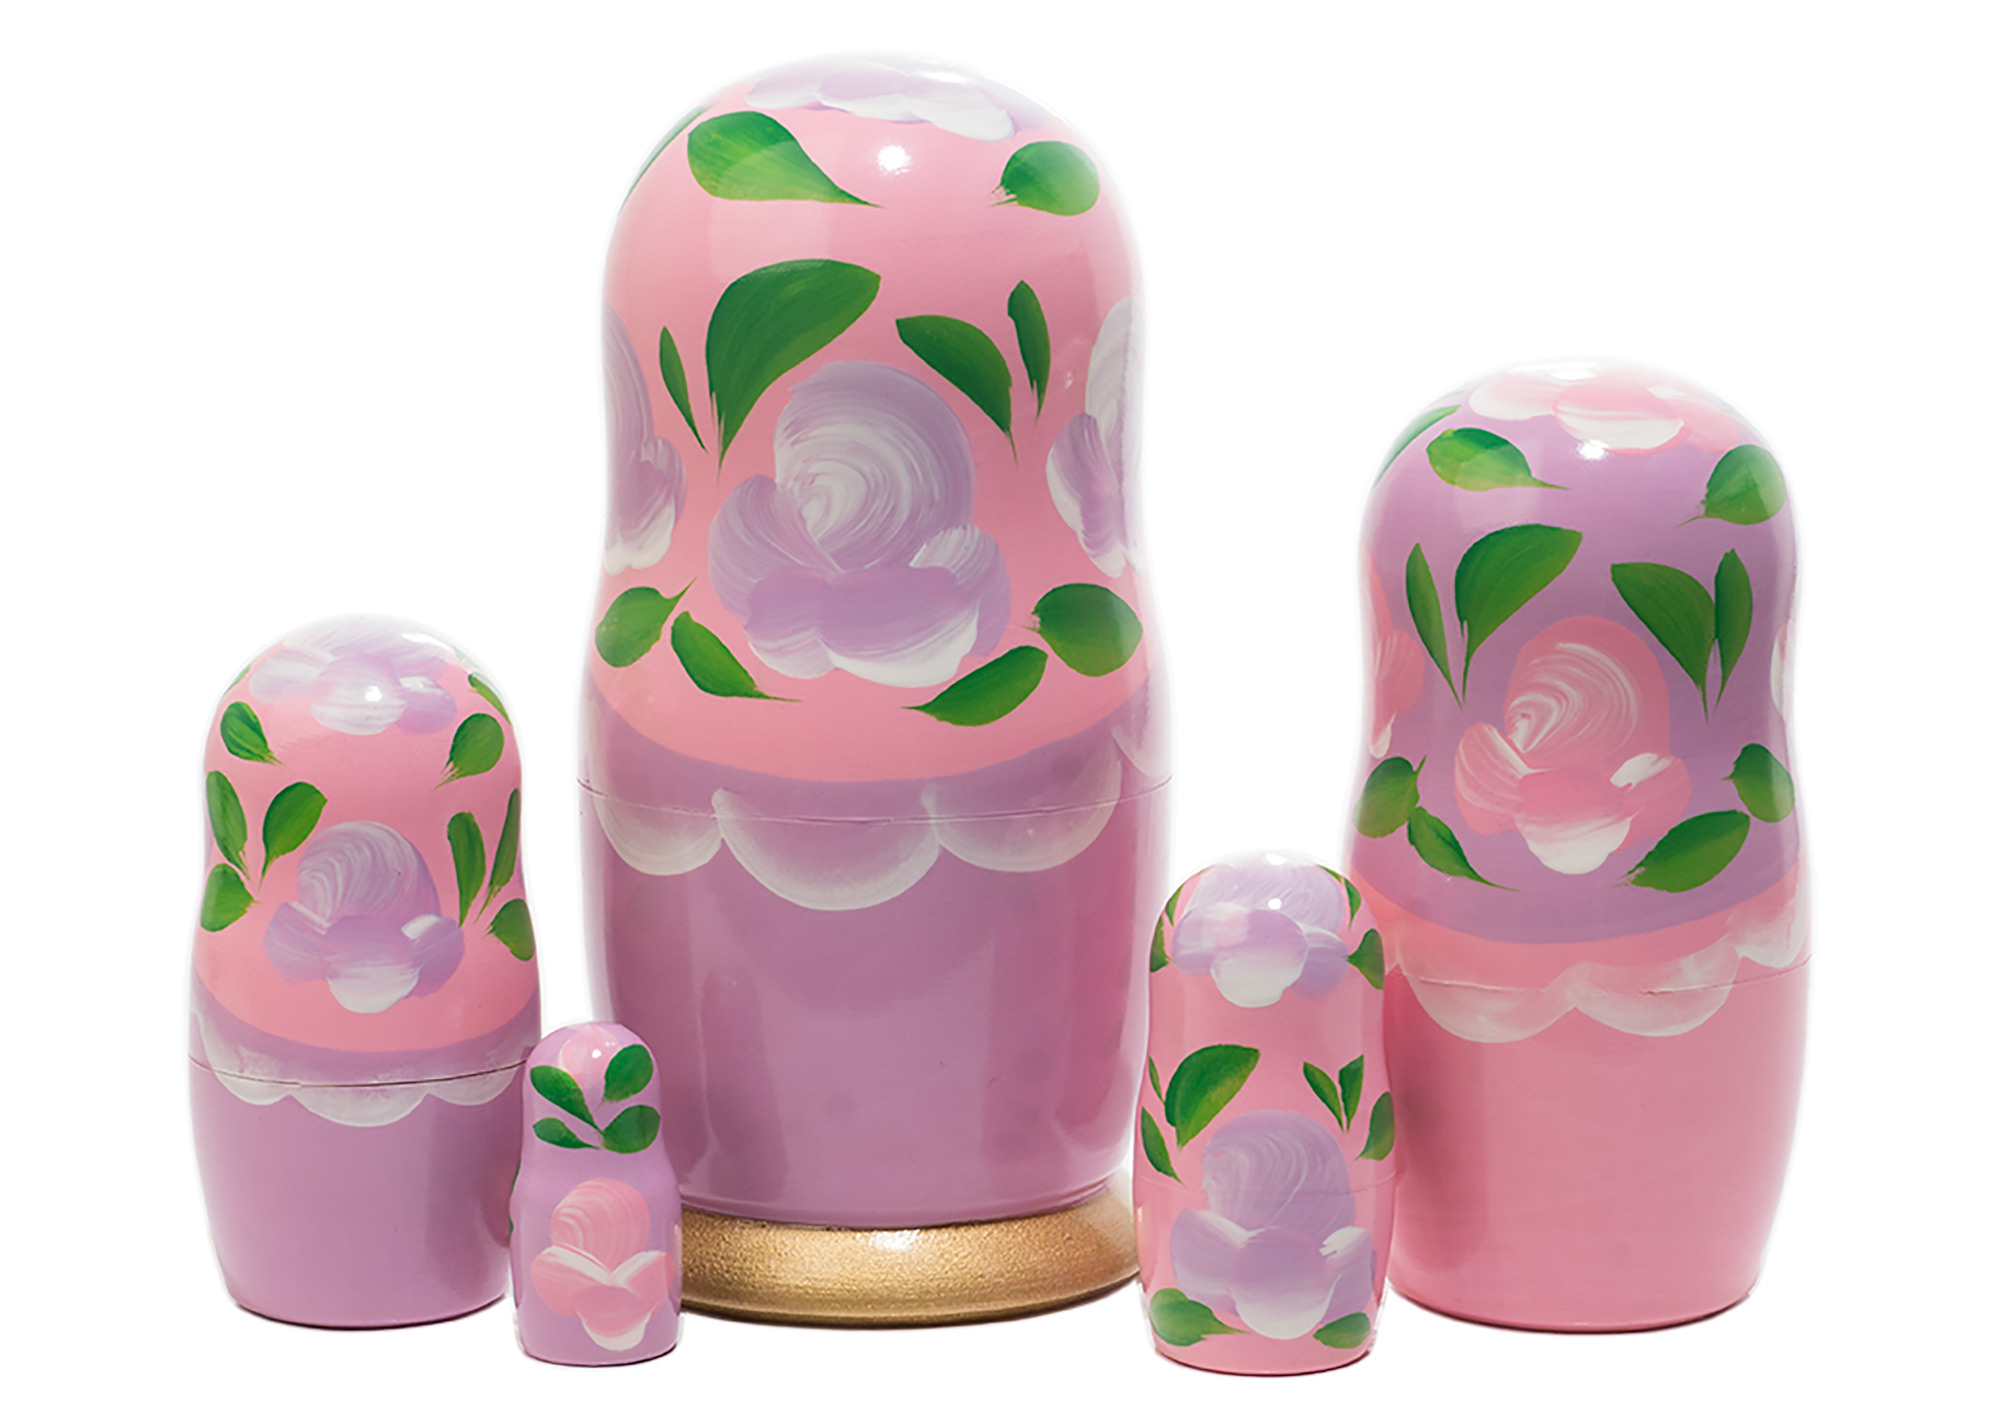 Buy Pink Classical Nesting Doll 5pc./6" - Russian Doll Inside A Doll at GoldenCockerel.com